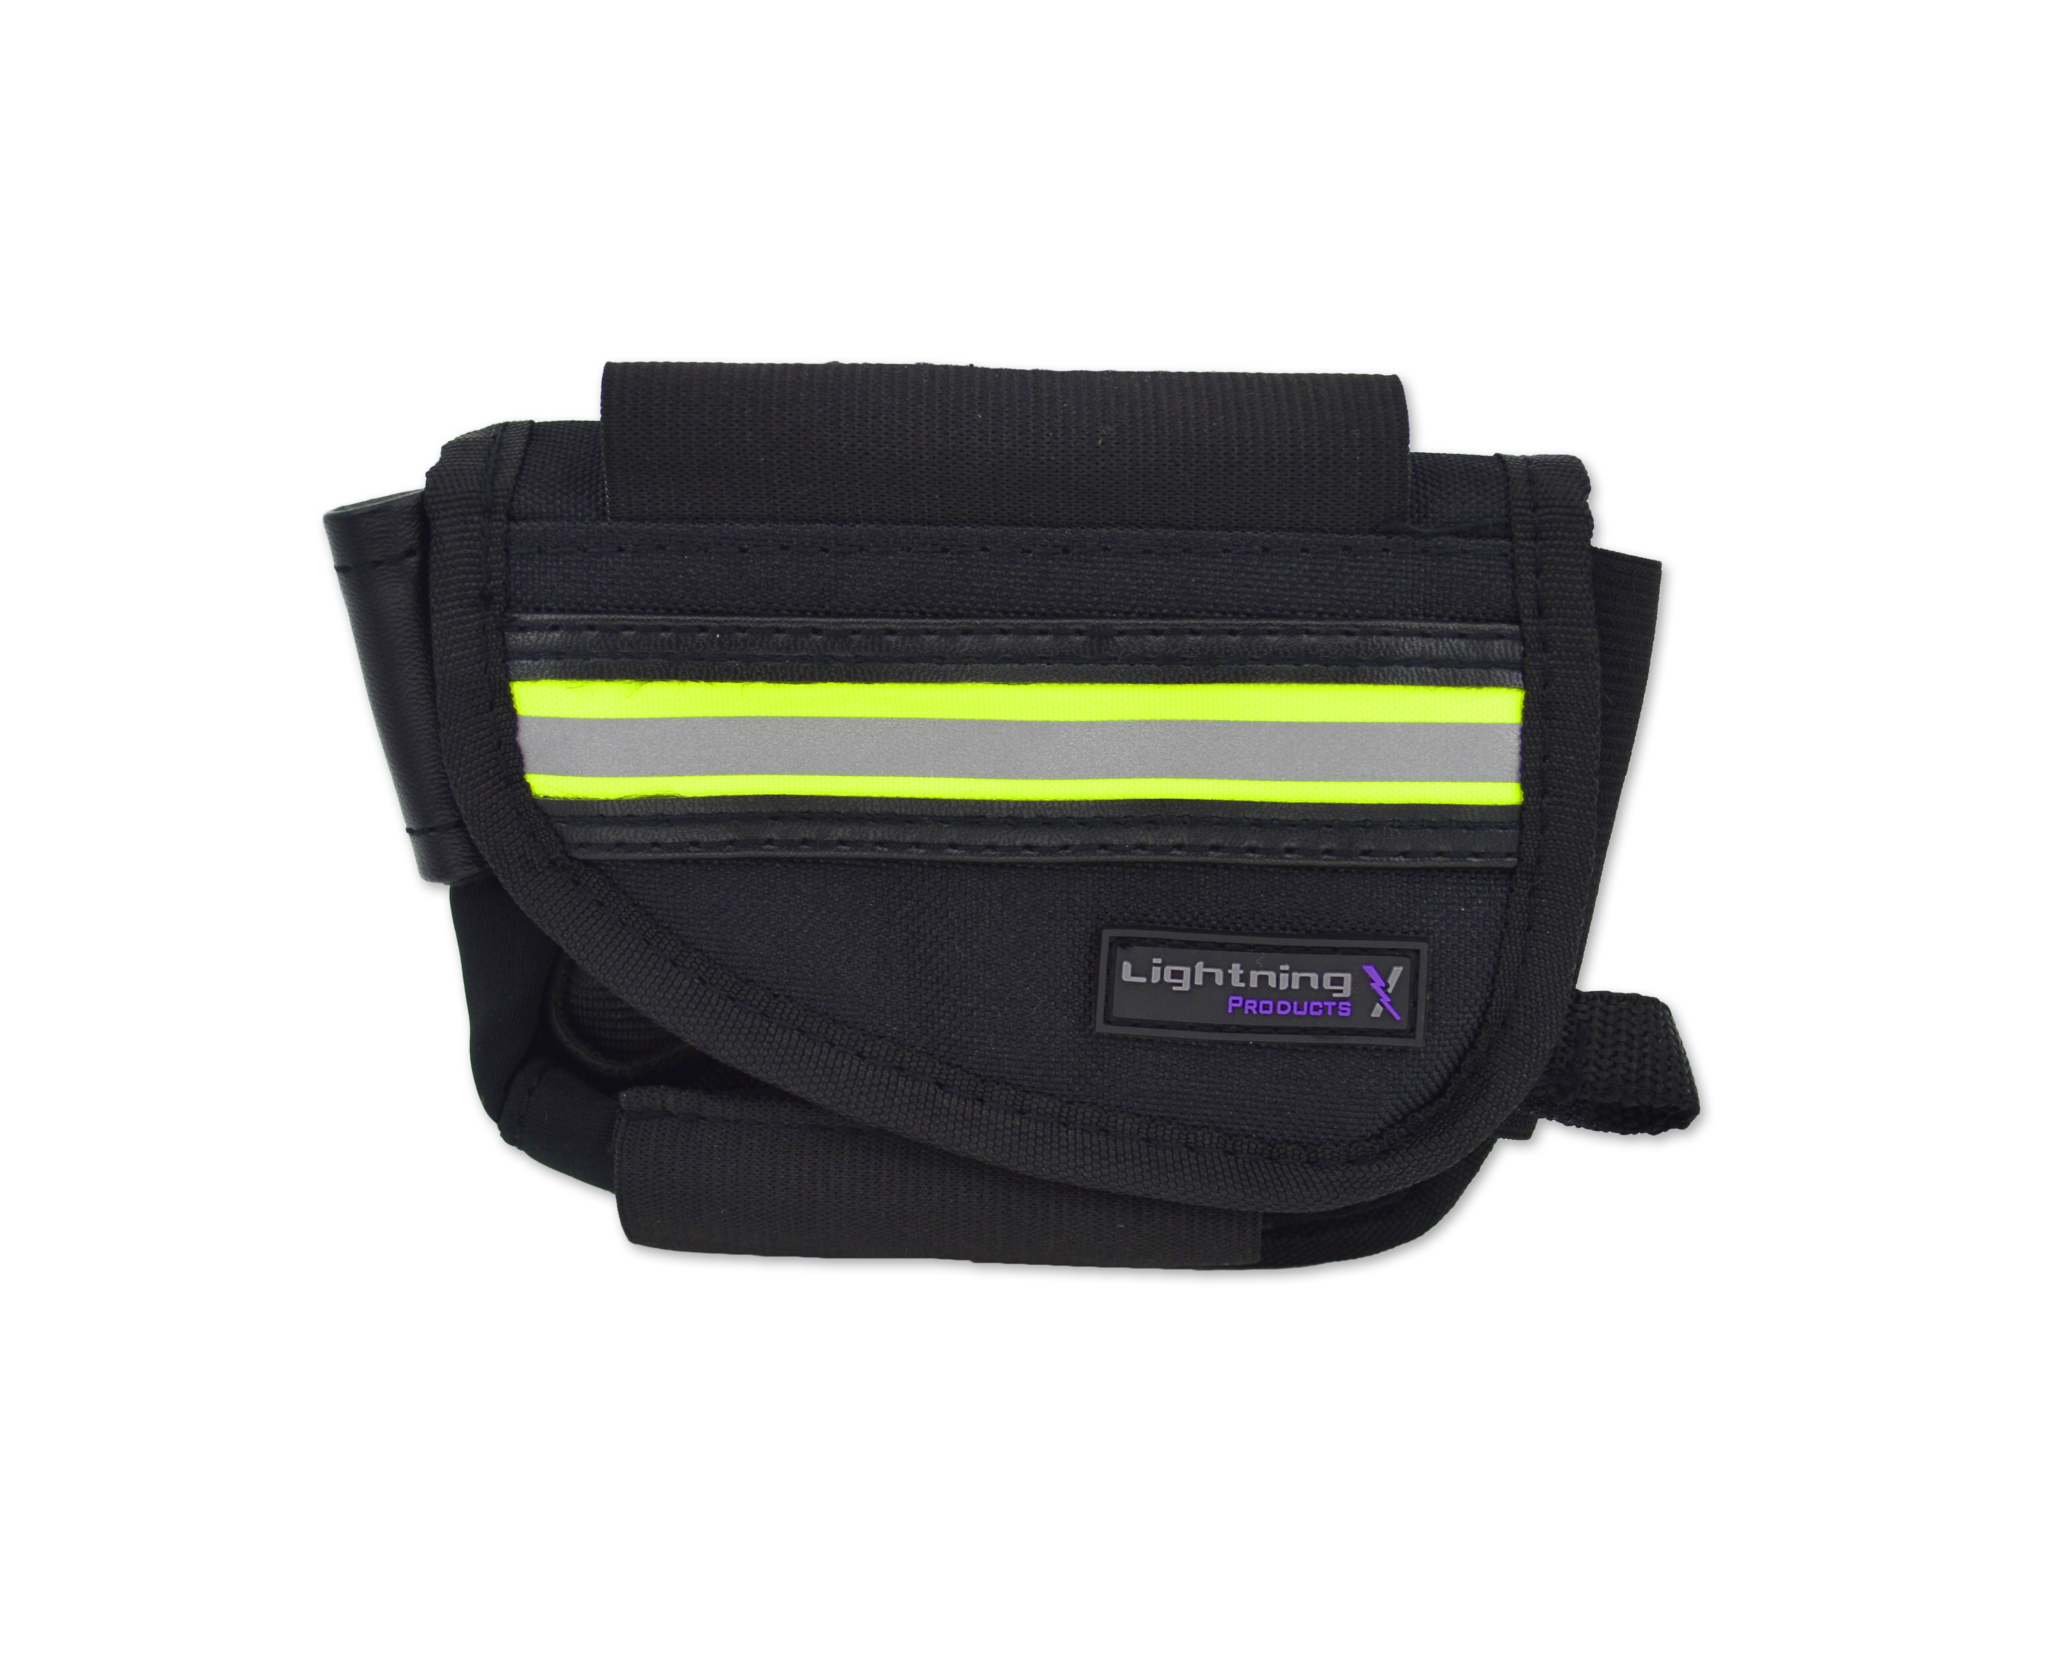 Black nylon EMT hip/belt pouch with lime yellow/silver reflective stripes and Lightning X Products logo, multiple compartments, and attachment options.